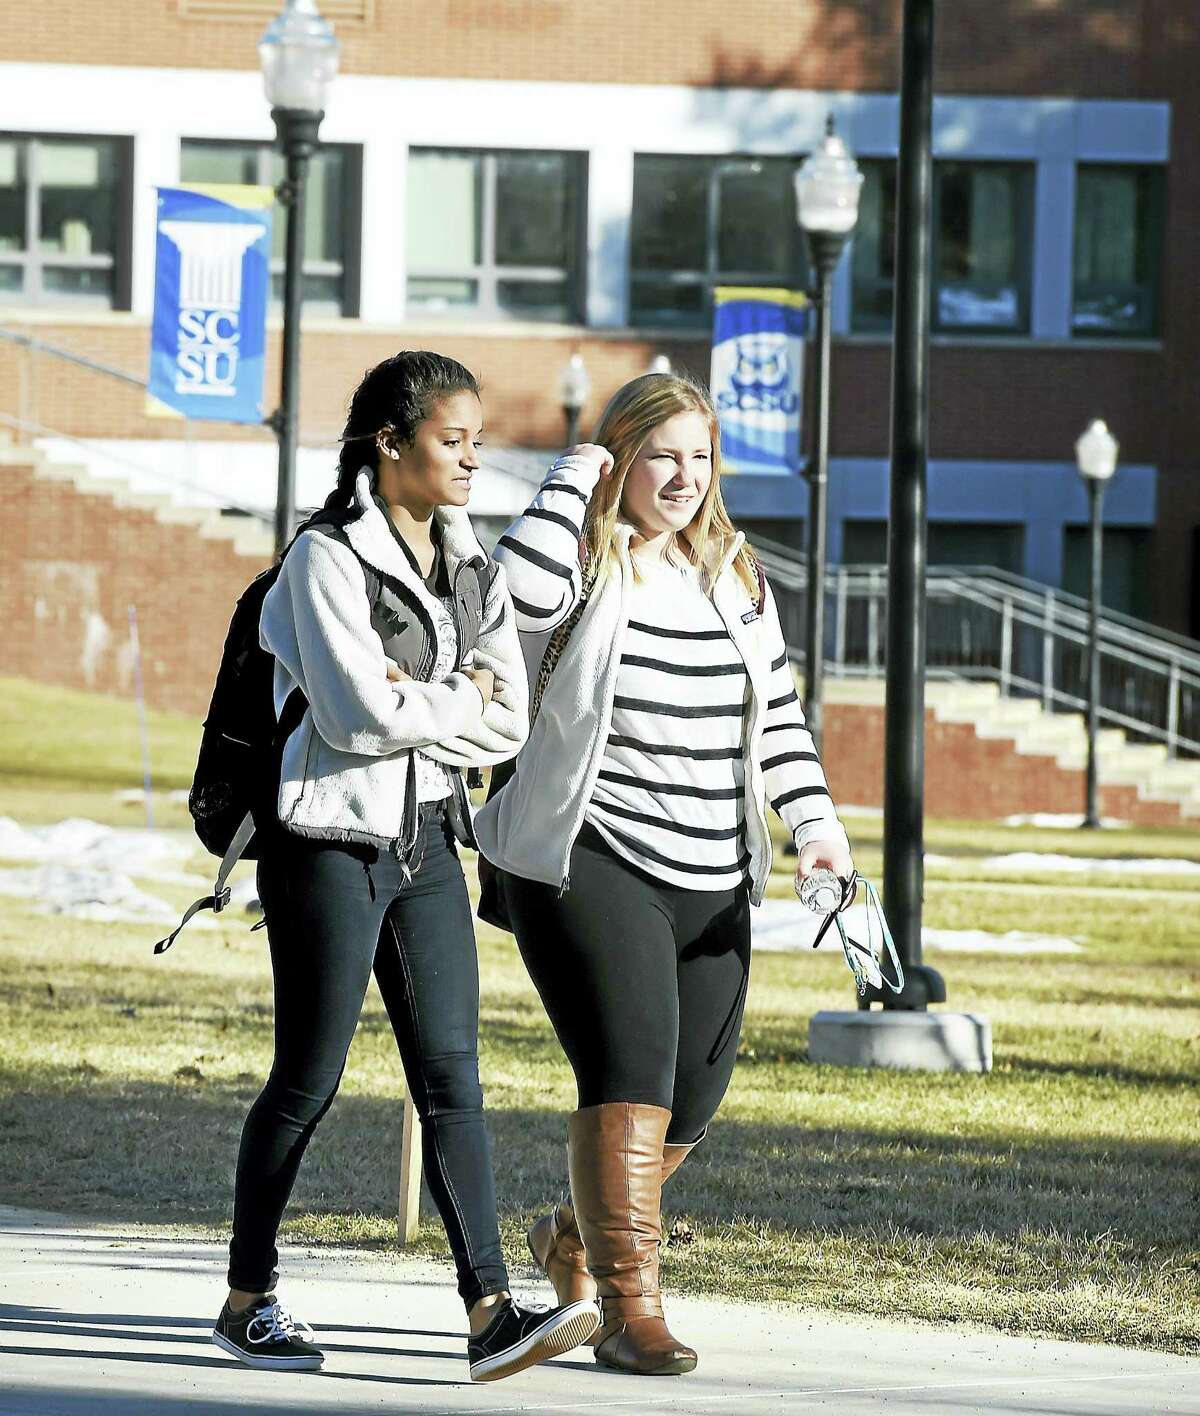 Students walk through the quad at Southern Connecticut State University in New Haven.